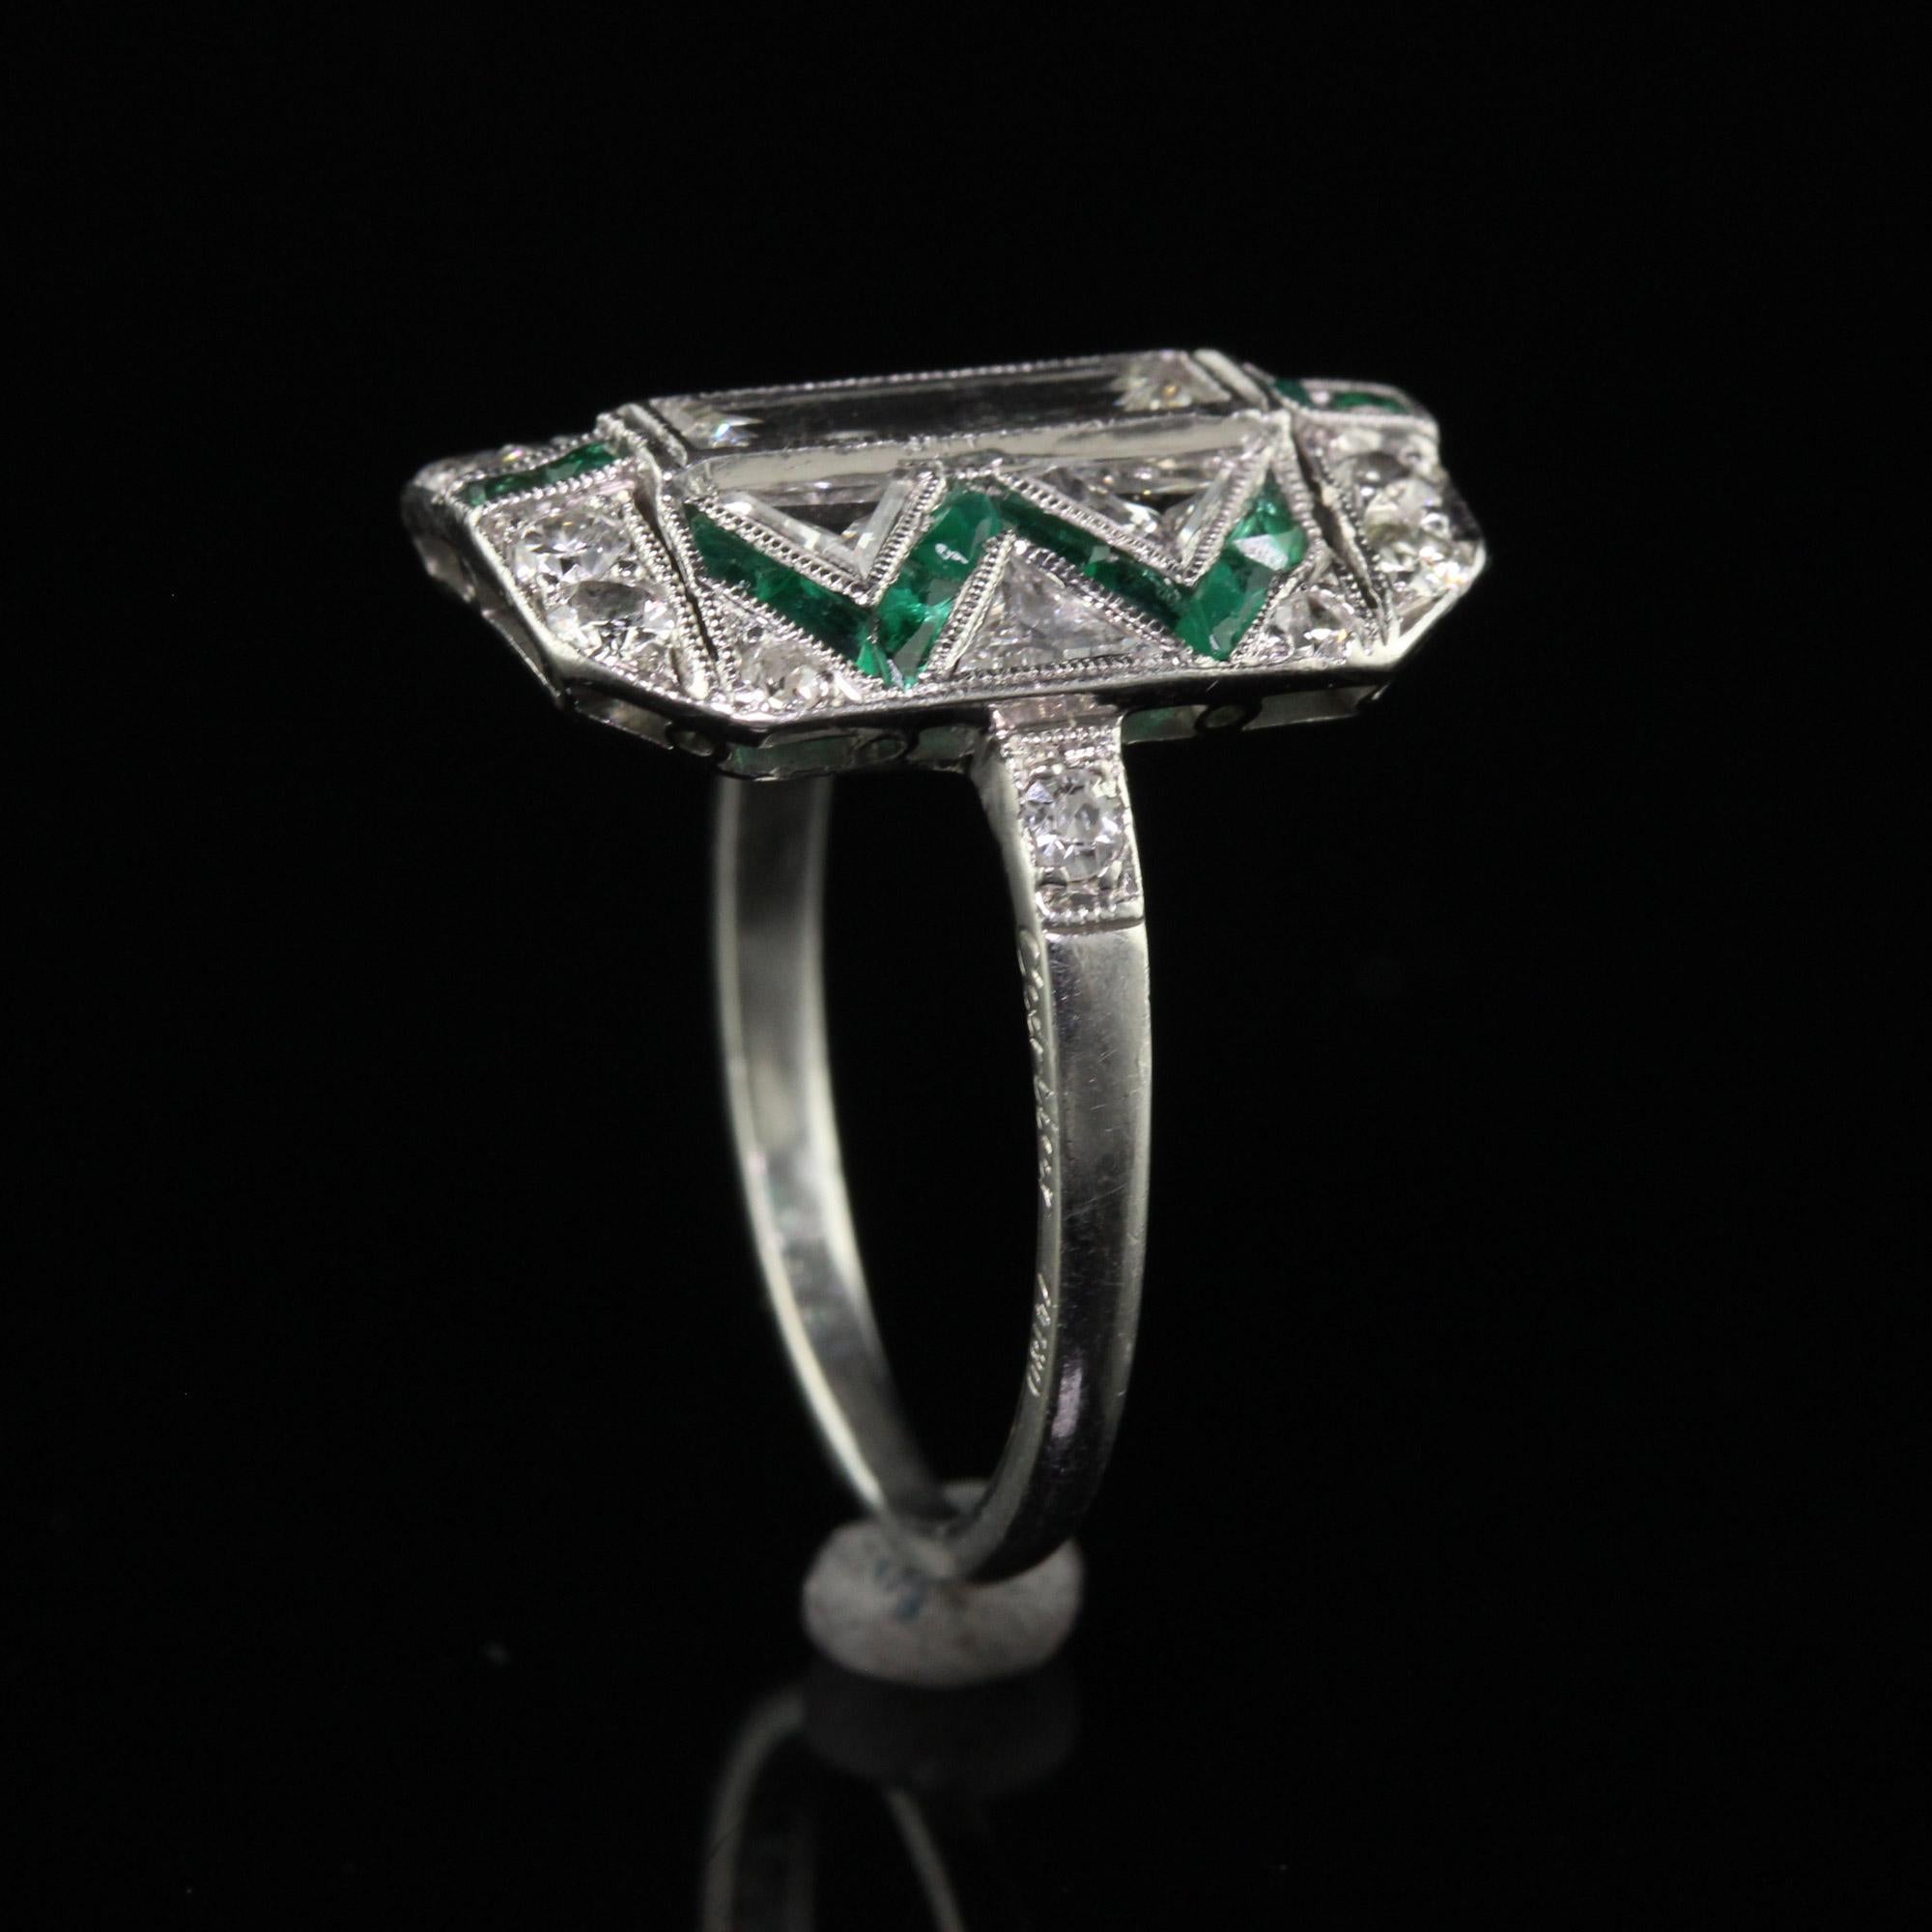 Antique Art Deco Cartier Old Baguette Diamond and Emerald Cocktail Ring For Sale 4